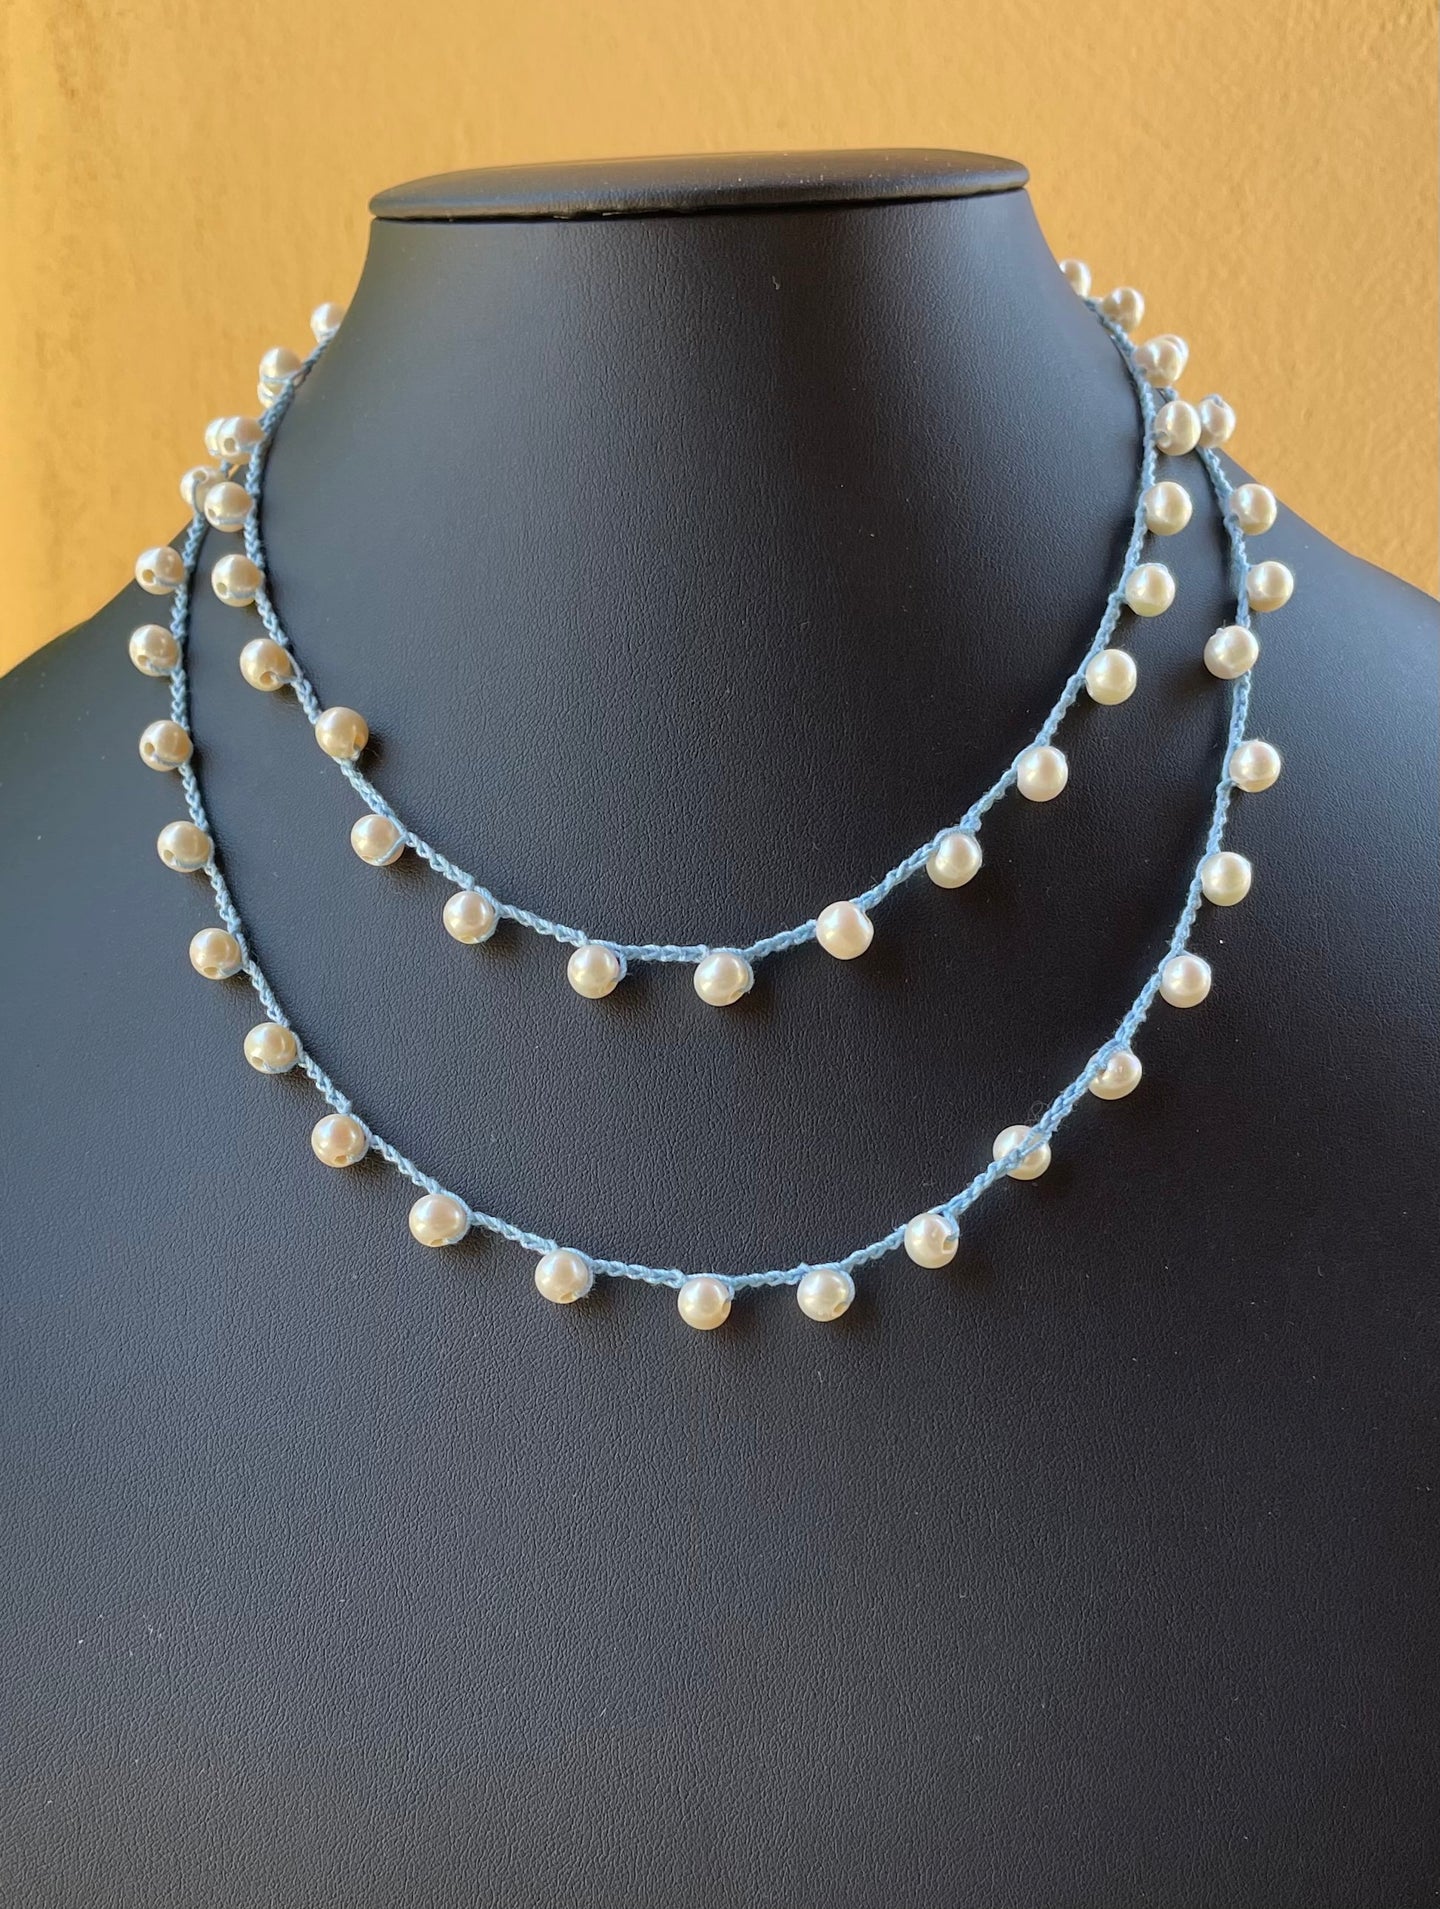 Necklace - Single or double: crocheted with white pearls